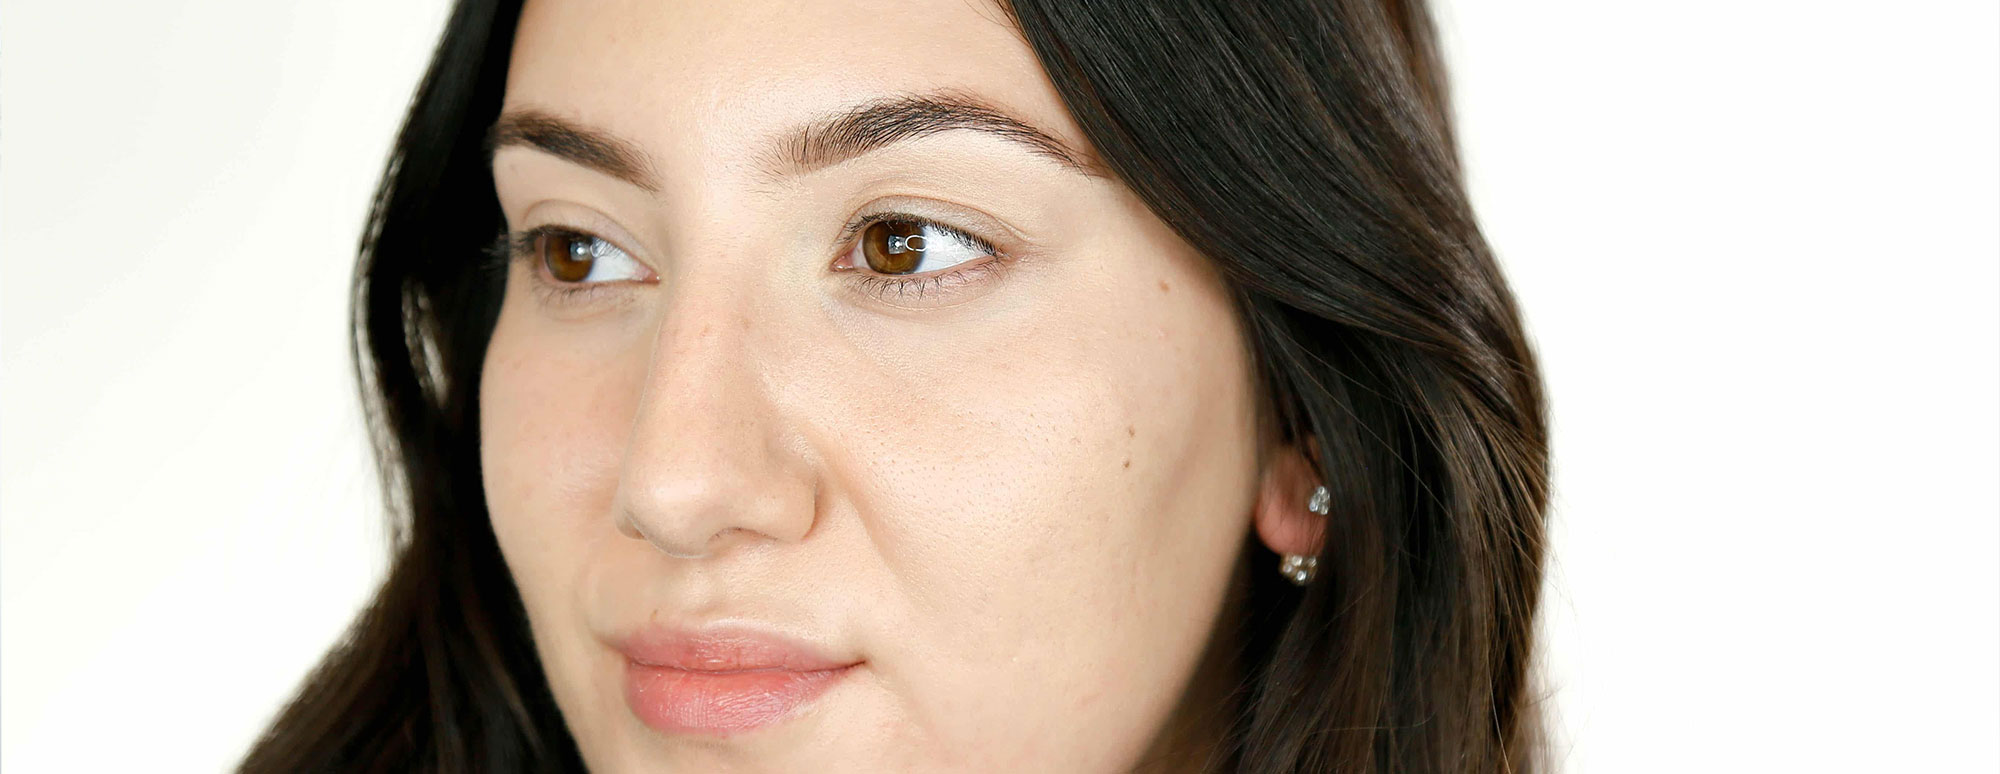 Effortless Brow Tutorial: Transform Your Brows in Three Easy Steps